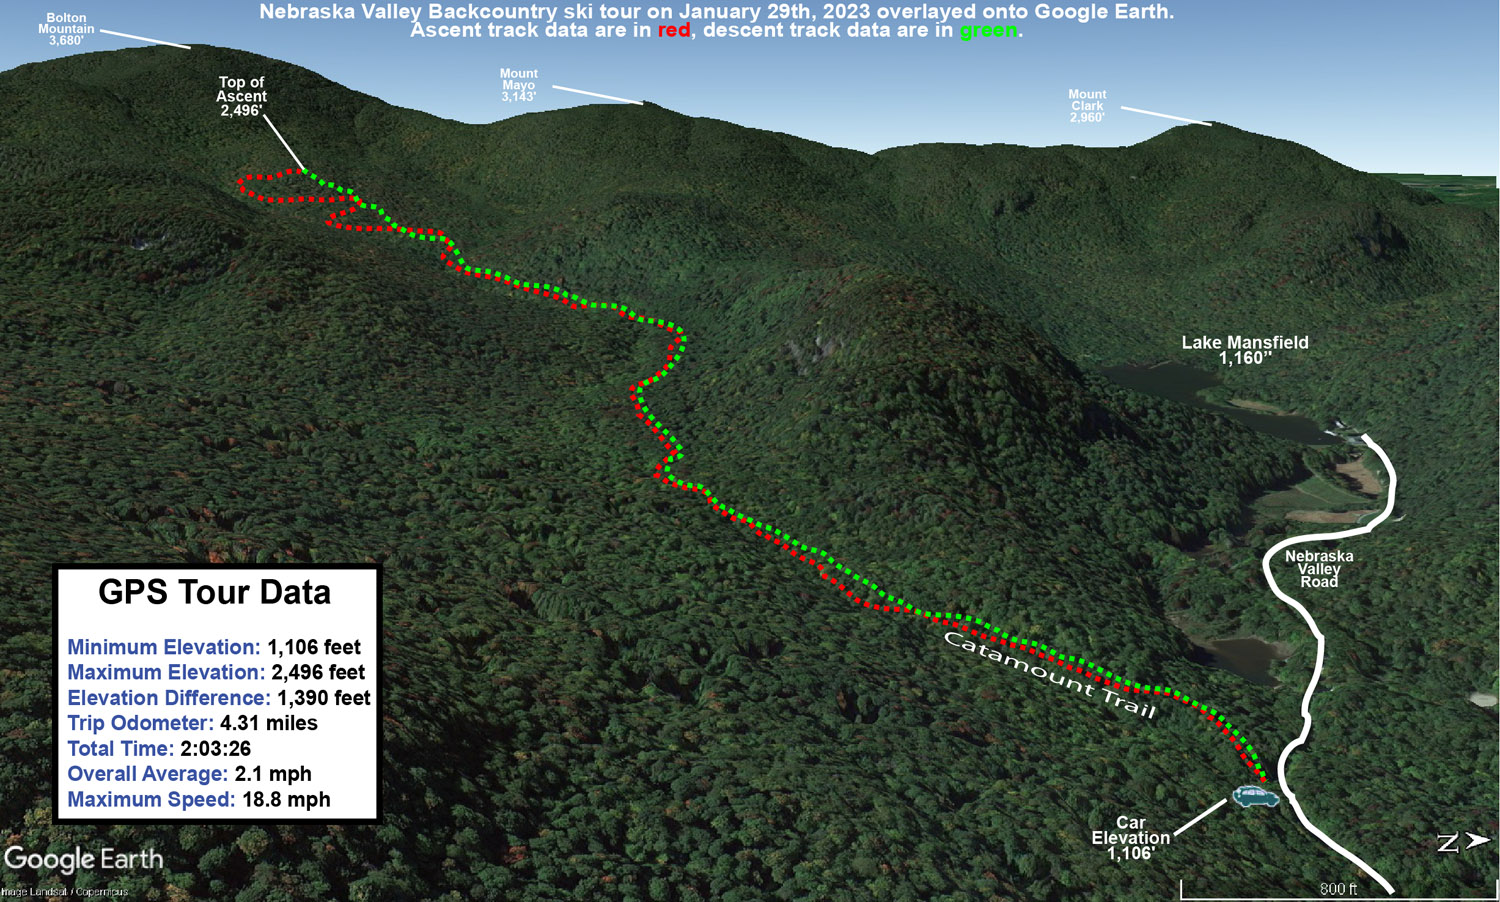 A Google Earth map with GPS tracking data from a backcountry ski tour along the Catamount Trail in the Nebraska Valley of Vermont